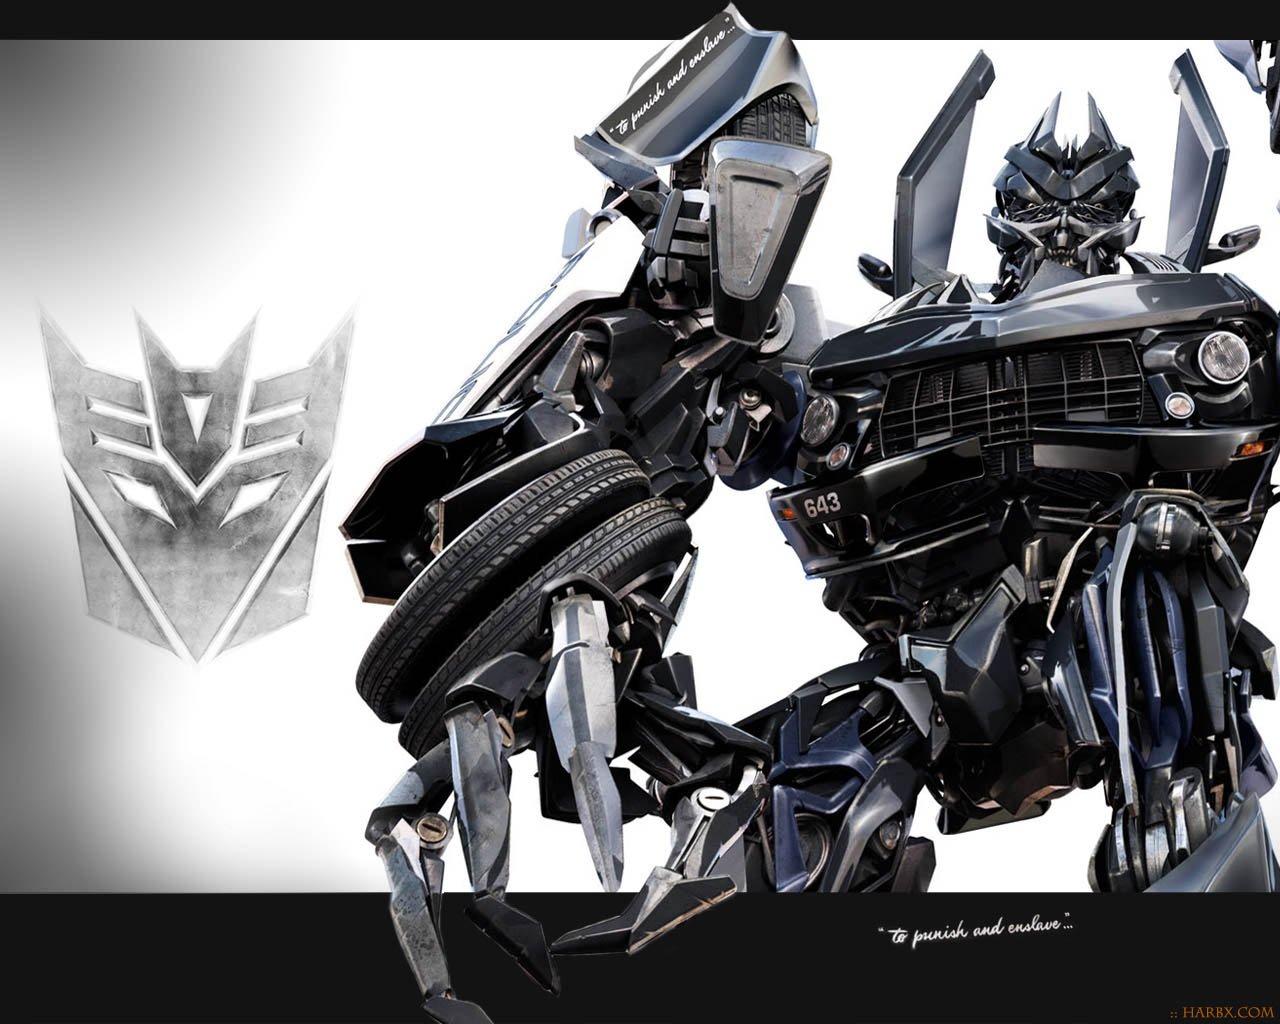  Powerful Transformers Images For Your Desktop